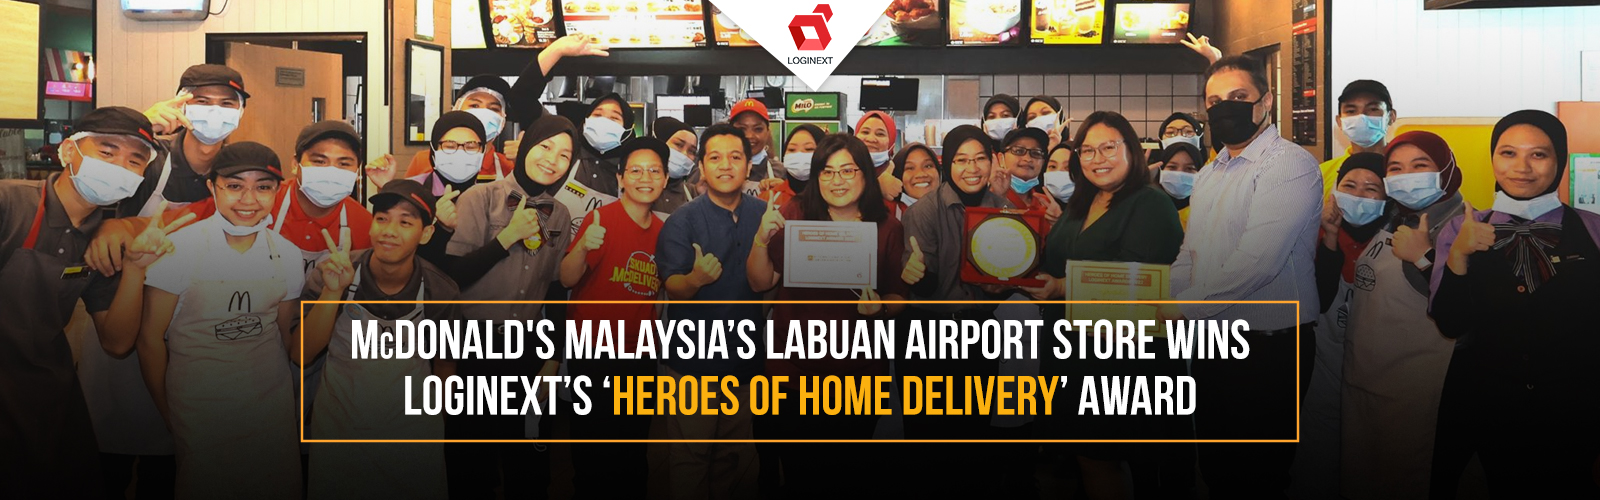 McDonald’s Malaysia’s Labuan Airport Store wins LogiNext’s ‘Heroes Of Home Delivery’ Award